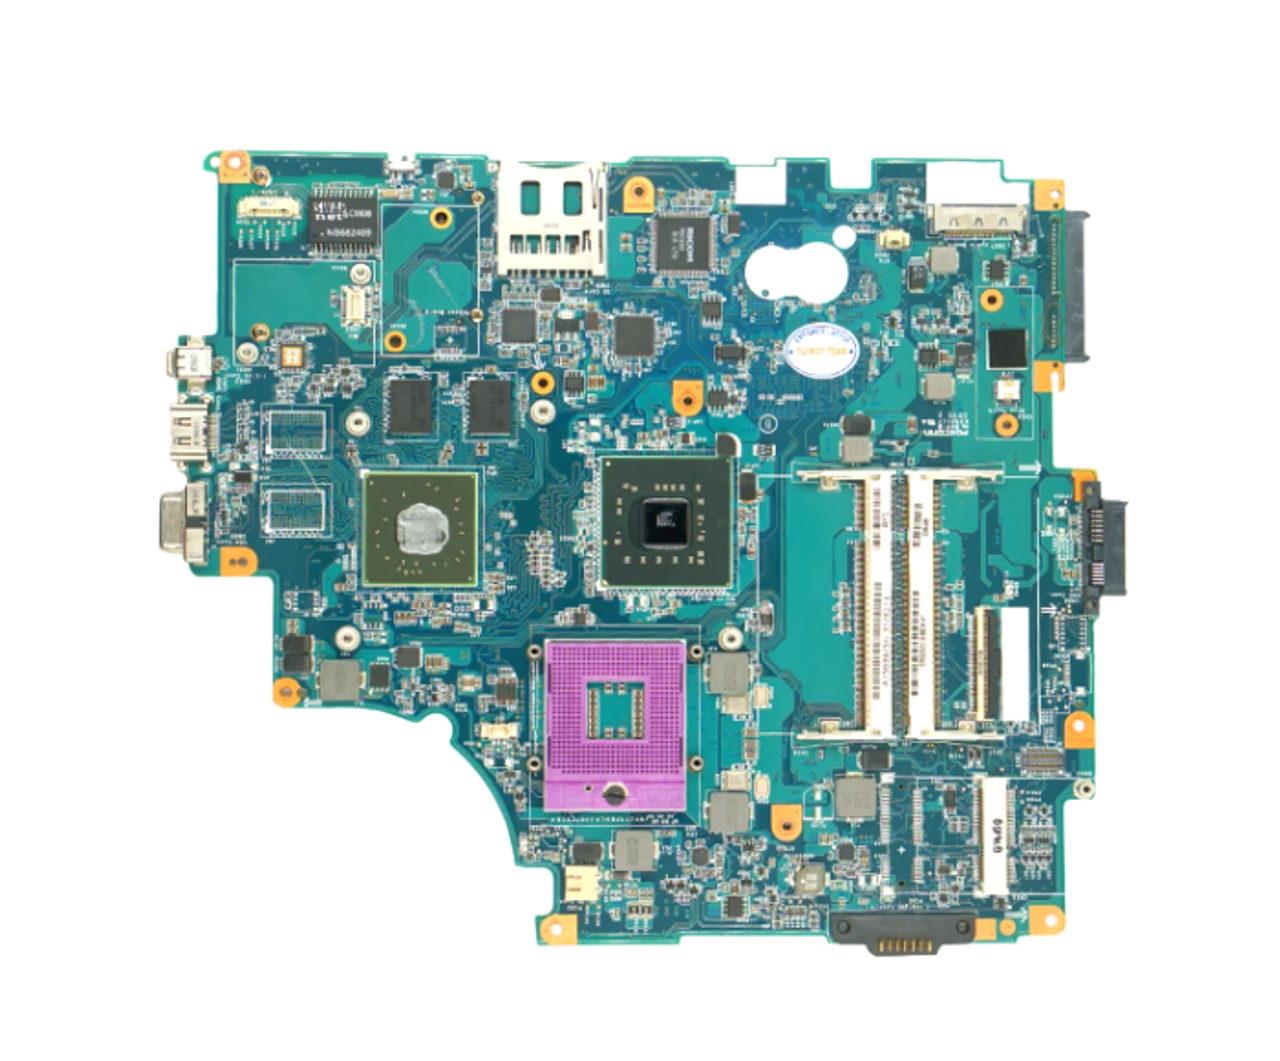 A1727021B | SONY | VAIO VGN-FW MBX-189 HDMI MOTHERBOARD